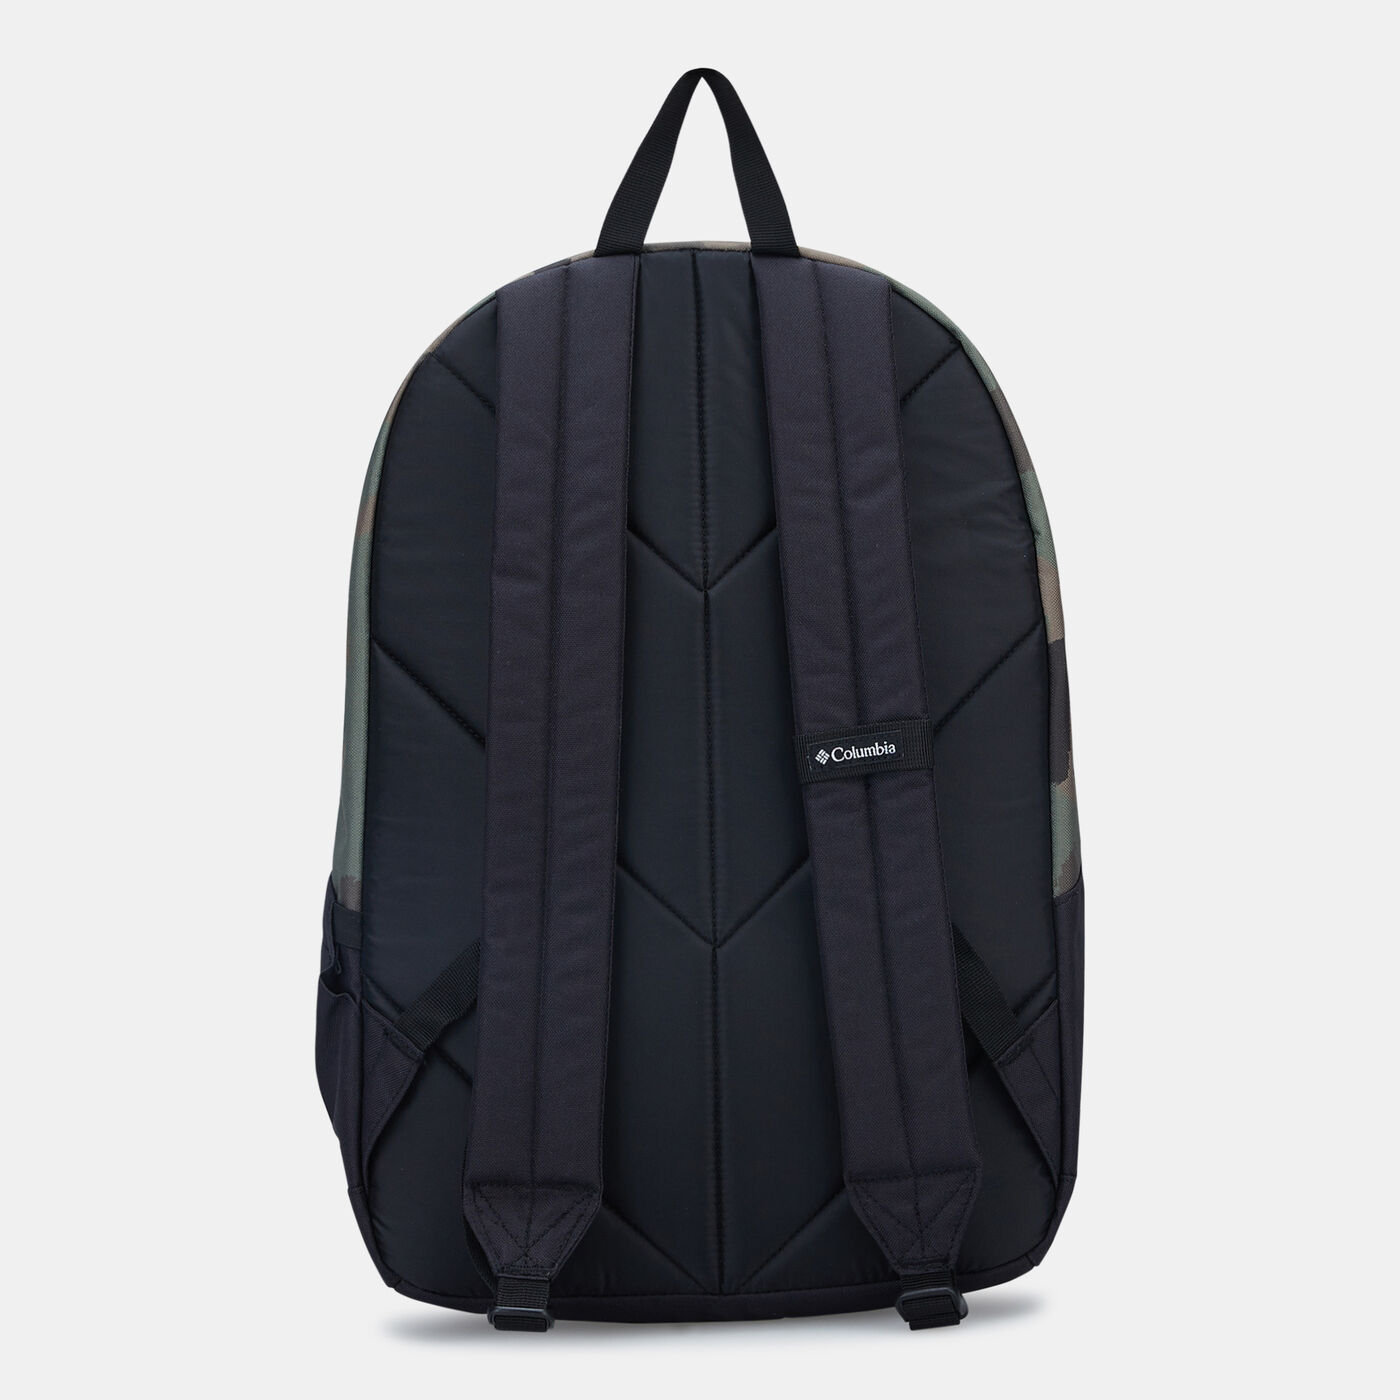 Zigzag™ 22L Backpack